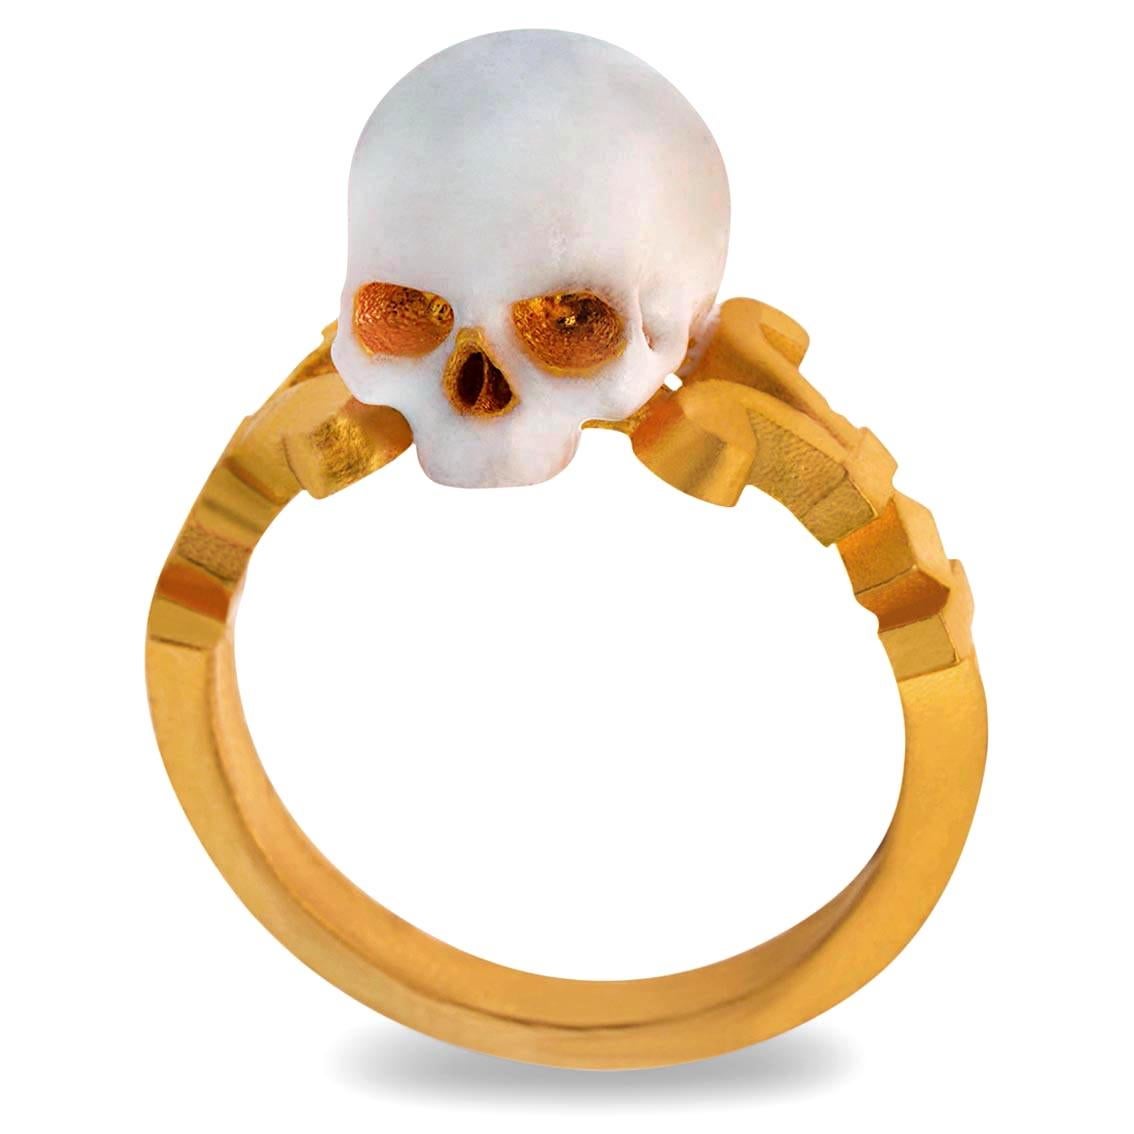 Handcrafted in luxurious 24kt yellow gold this stunning ring features a saintly baroque style enamelled skull perched atop a signature scrolled William Llewellyn Griffiths split shank. 

Measuring 9mm above the finger this sumptuous memento mori